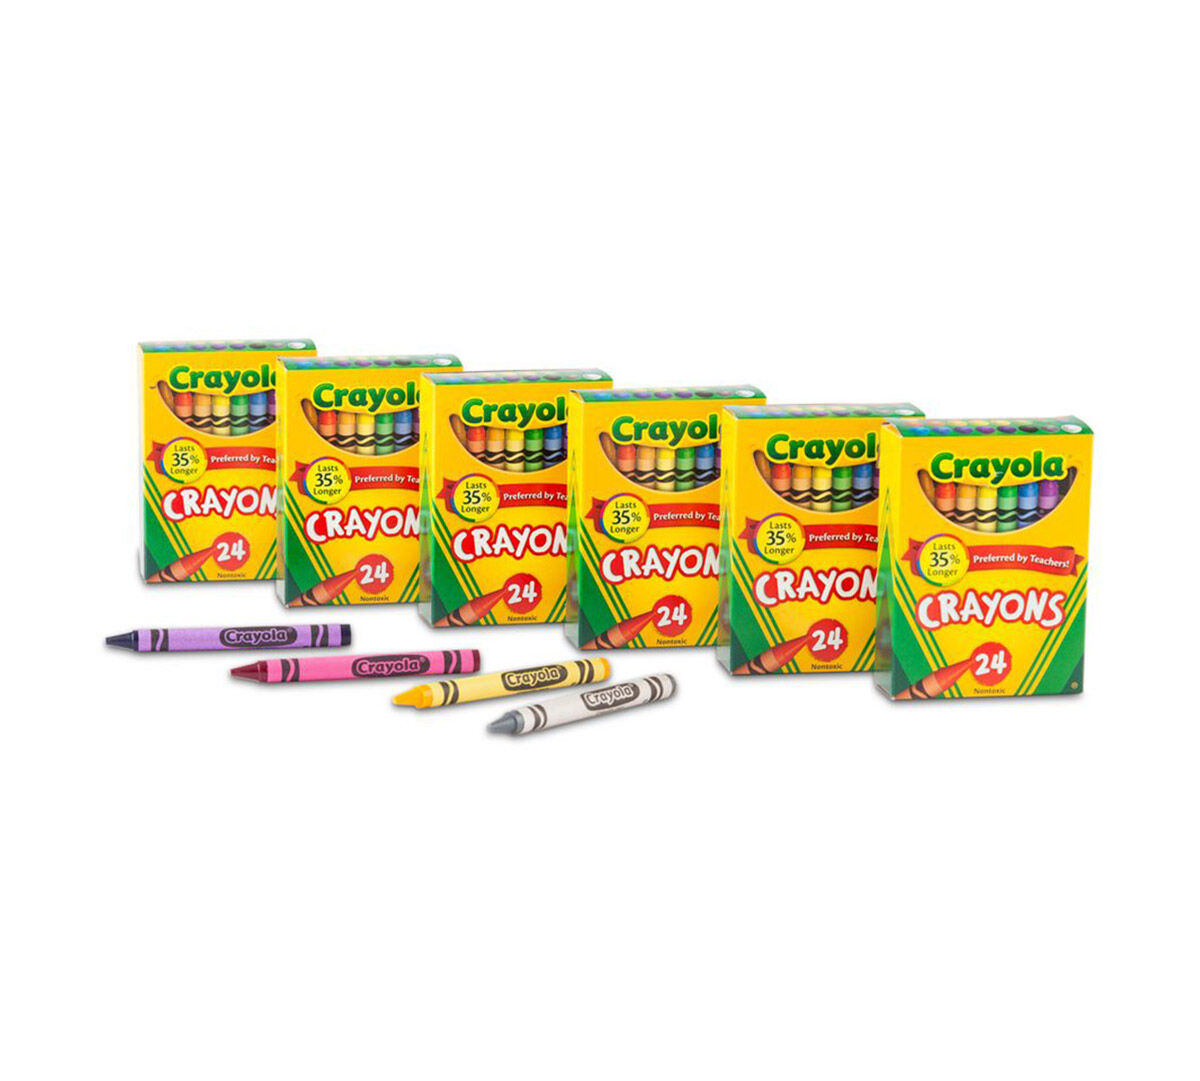 24 ct Crayons 6 -pack